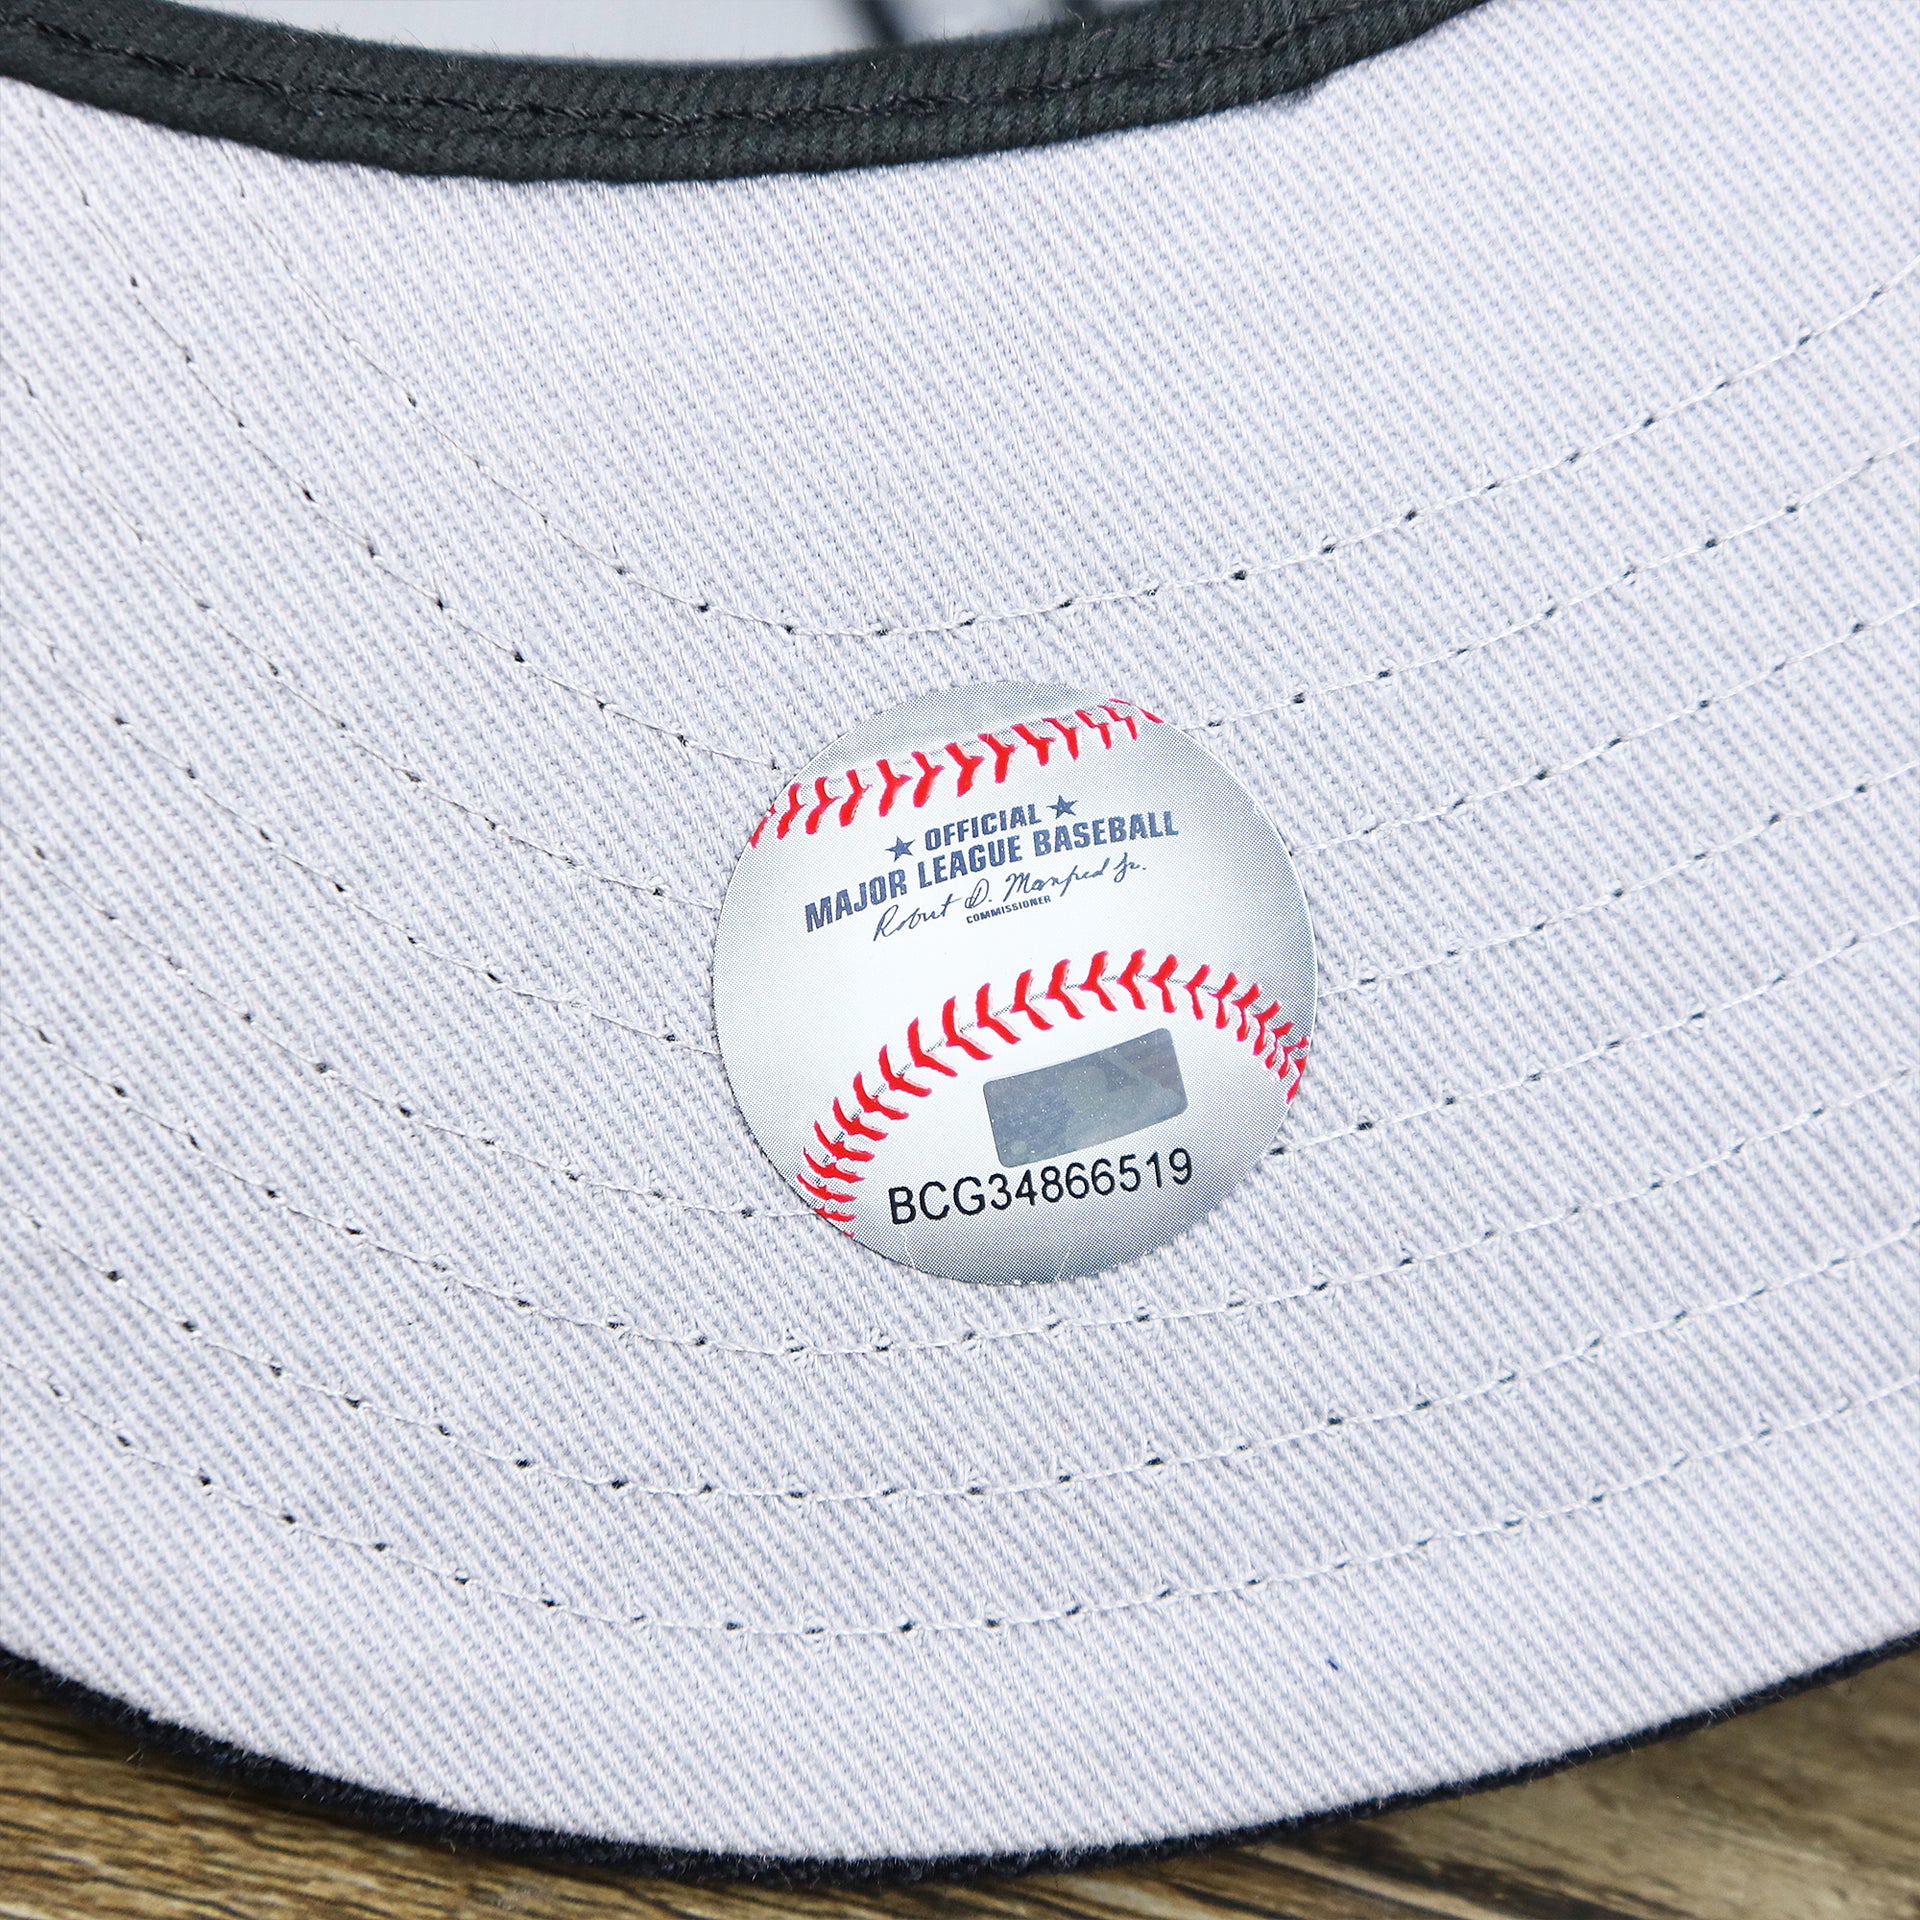 The MLB Sticker on the New York Yankees Gray Bottom Wool 59Fifty Fitted Cap | Navy Blue 59Fifty Cap